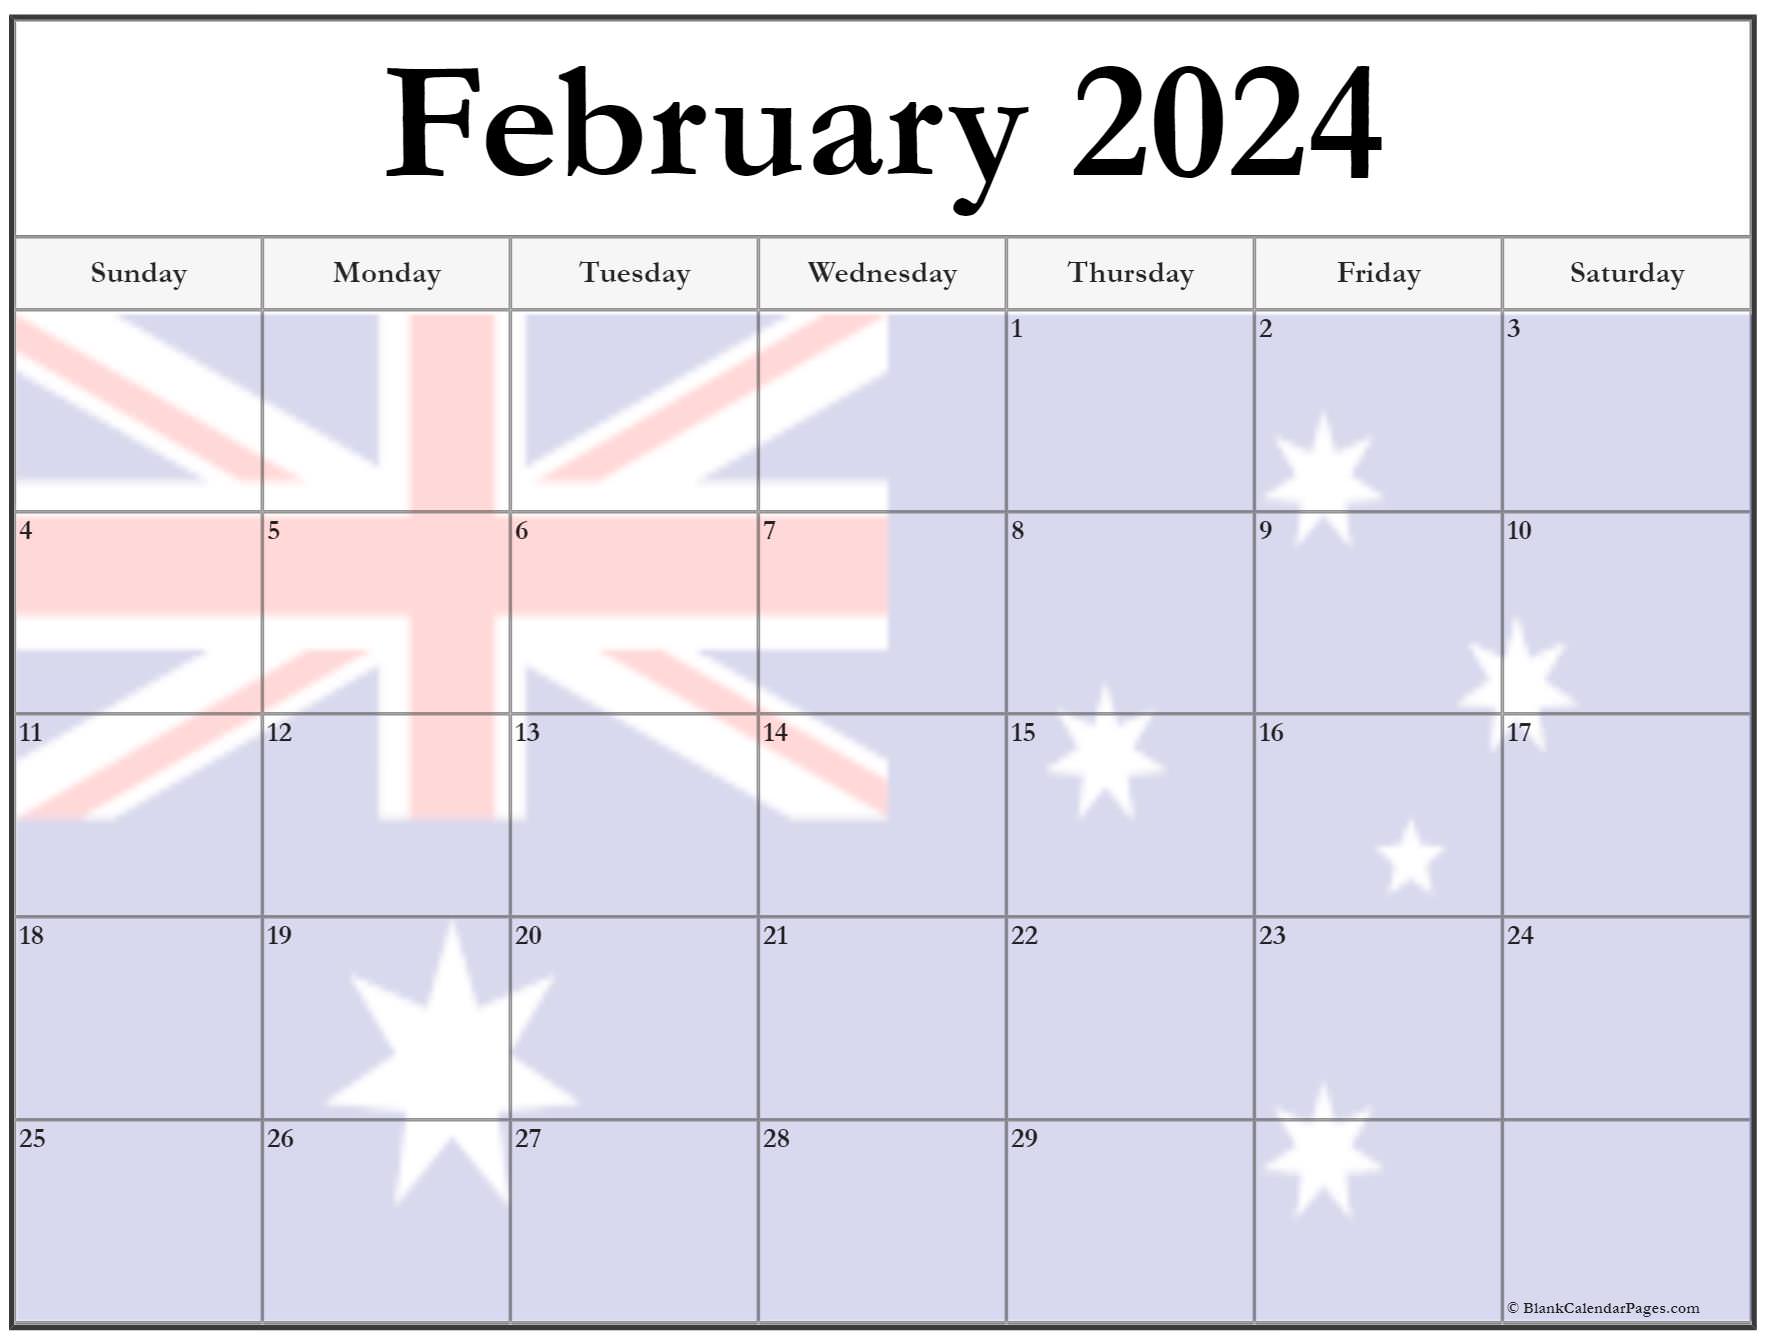 Collection of February 2023 photo calendars with image filters